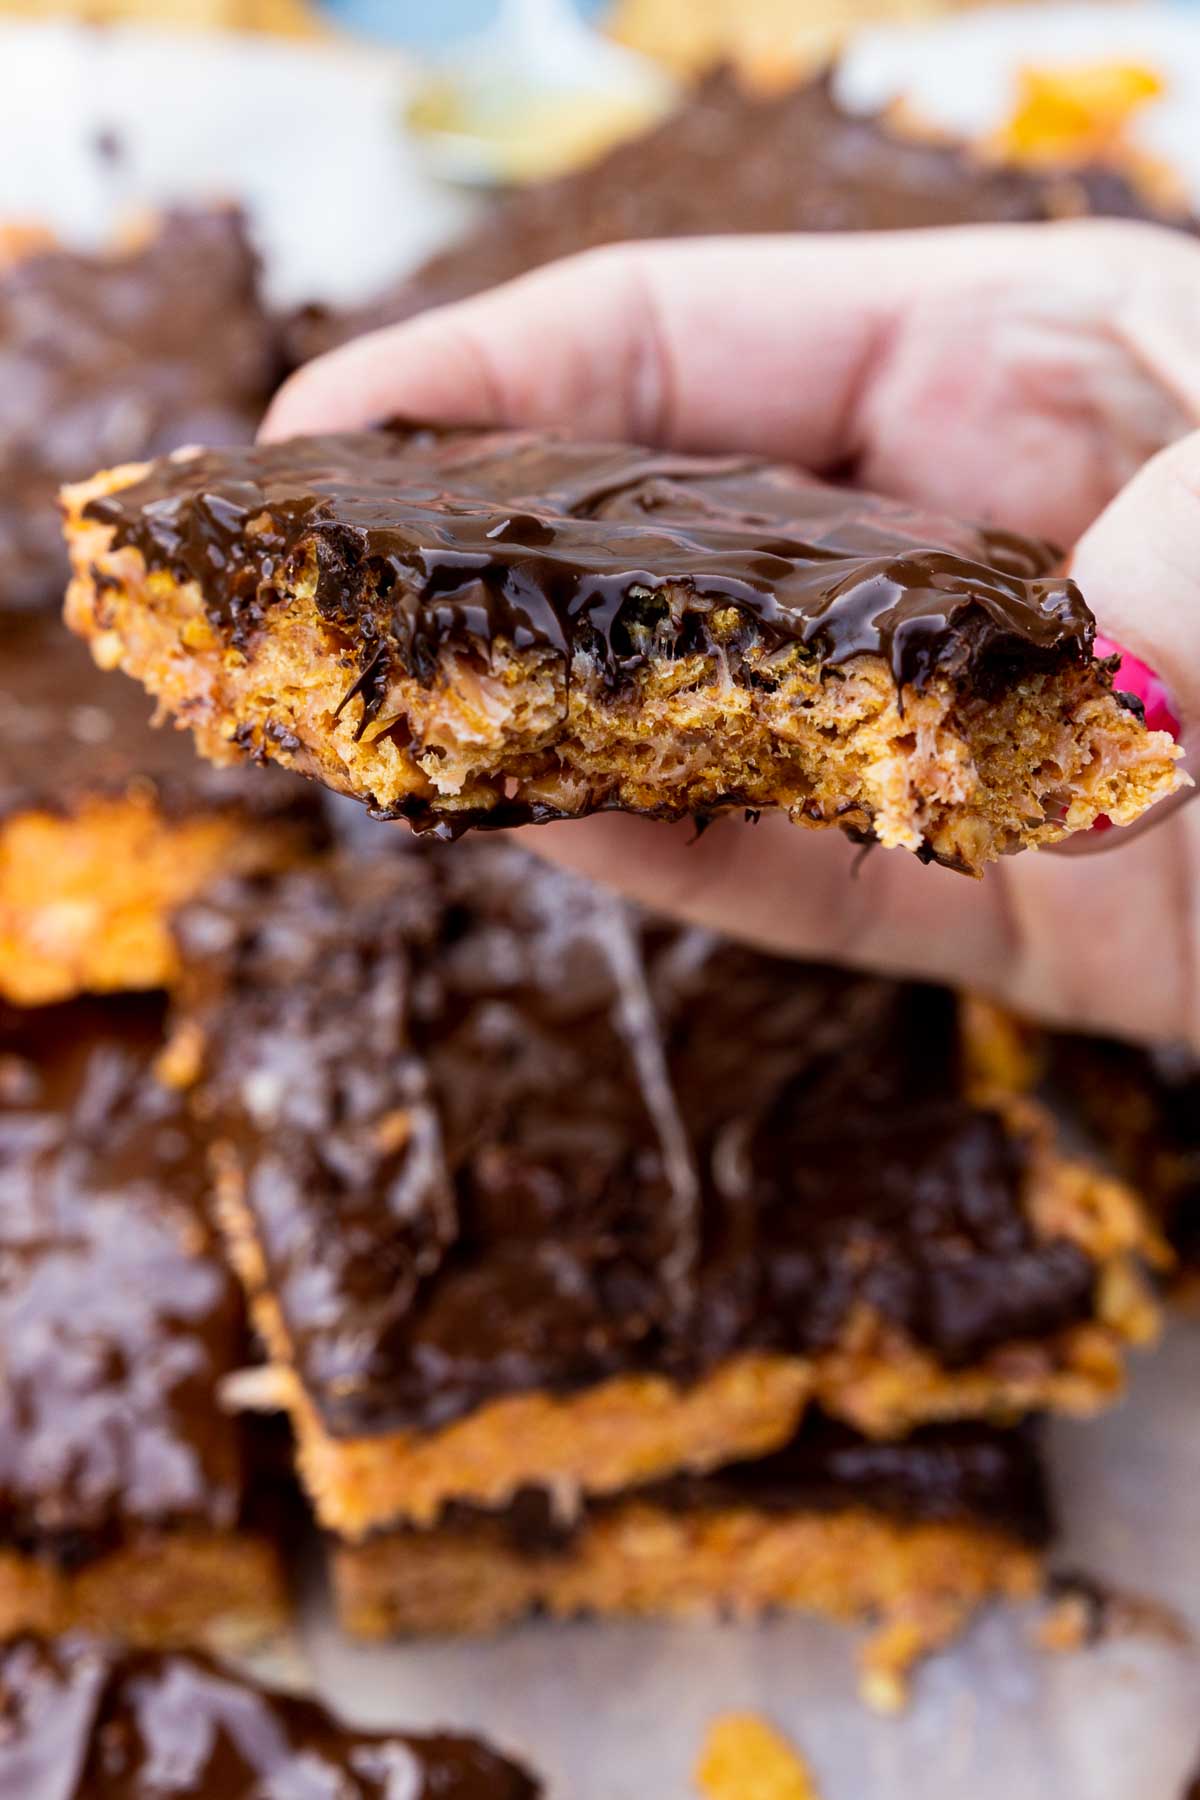 Closeup of someone holding a peanut butter cornflake bar with a bite out of it and with more bars below and around it.